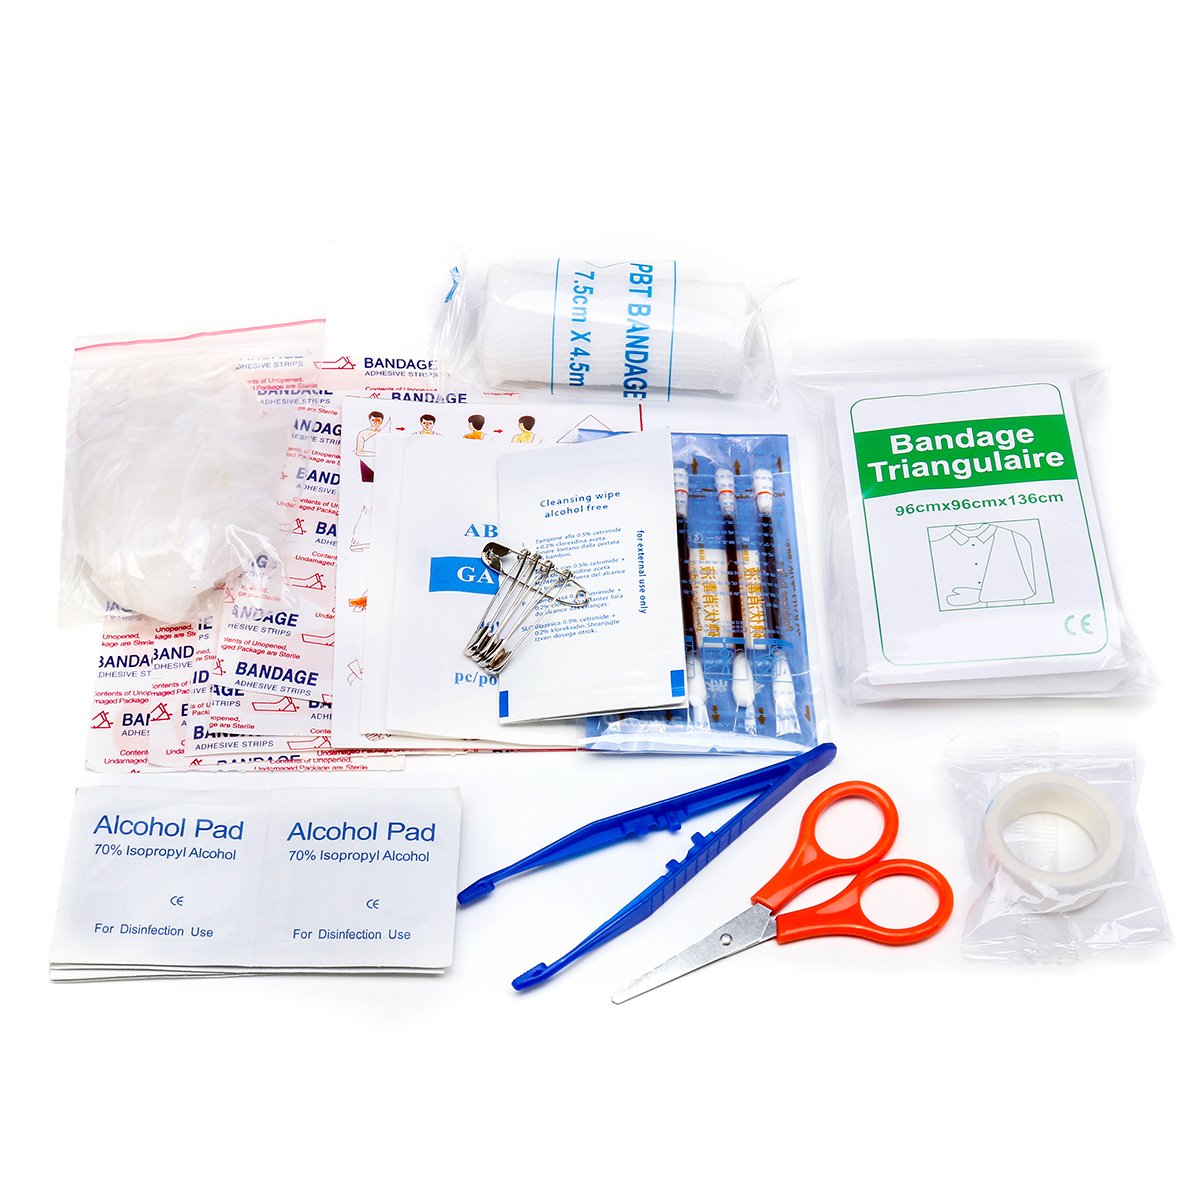 46Pcs-IN-1-SOS-Emergency-Survival-Kit-First-Aid-Kit-For-Home-Office-Camping-1440023-4